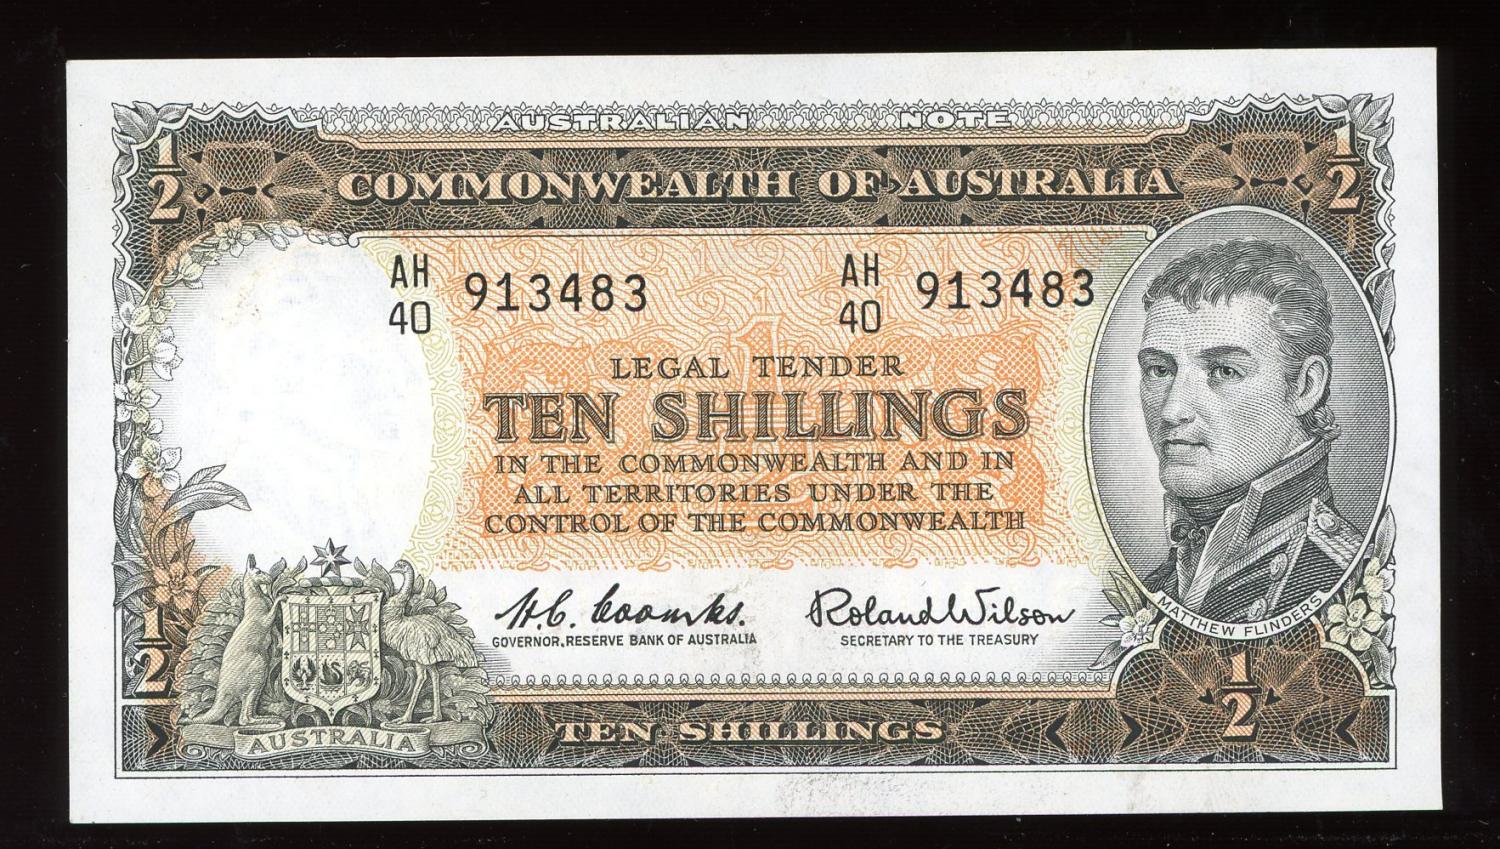 Thumbnail for 1961 Coombs-Wilson Ten Shilling Note AH40 913483 EF